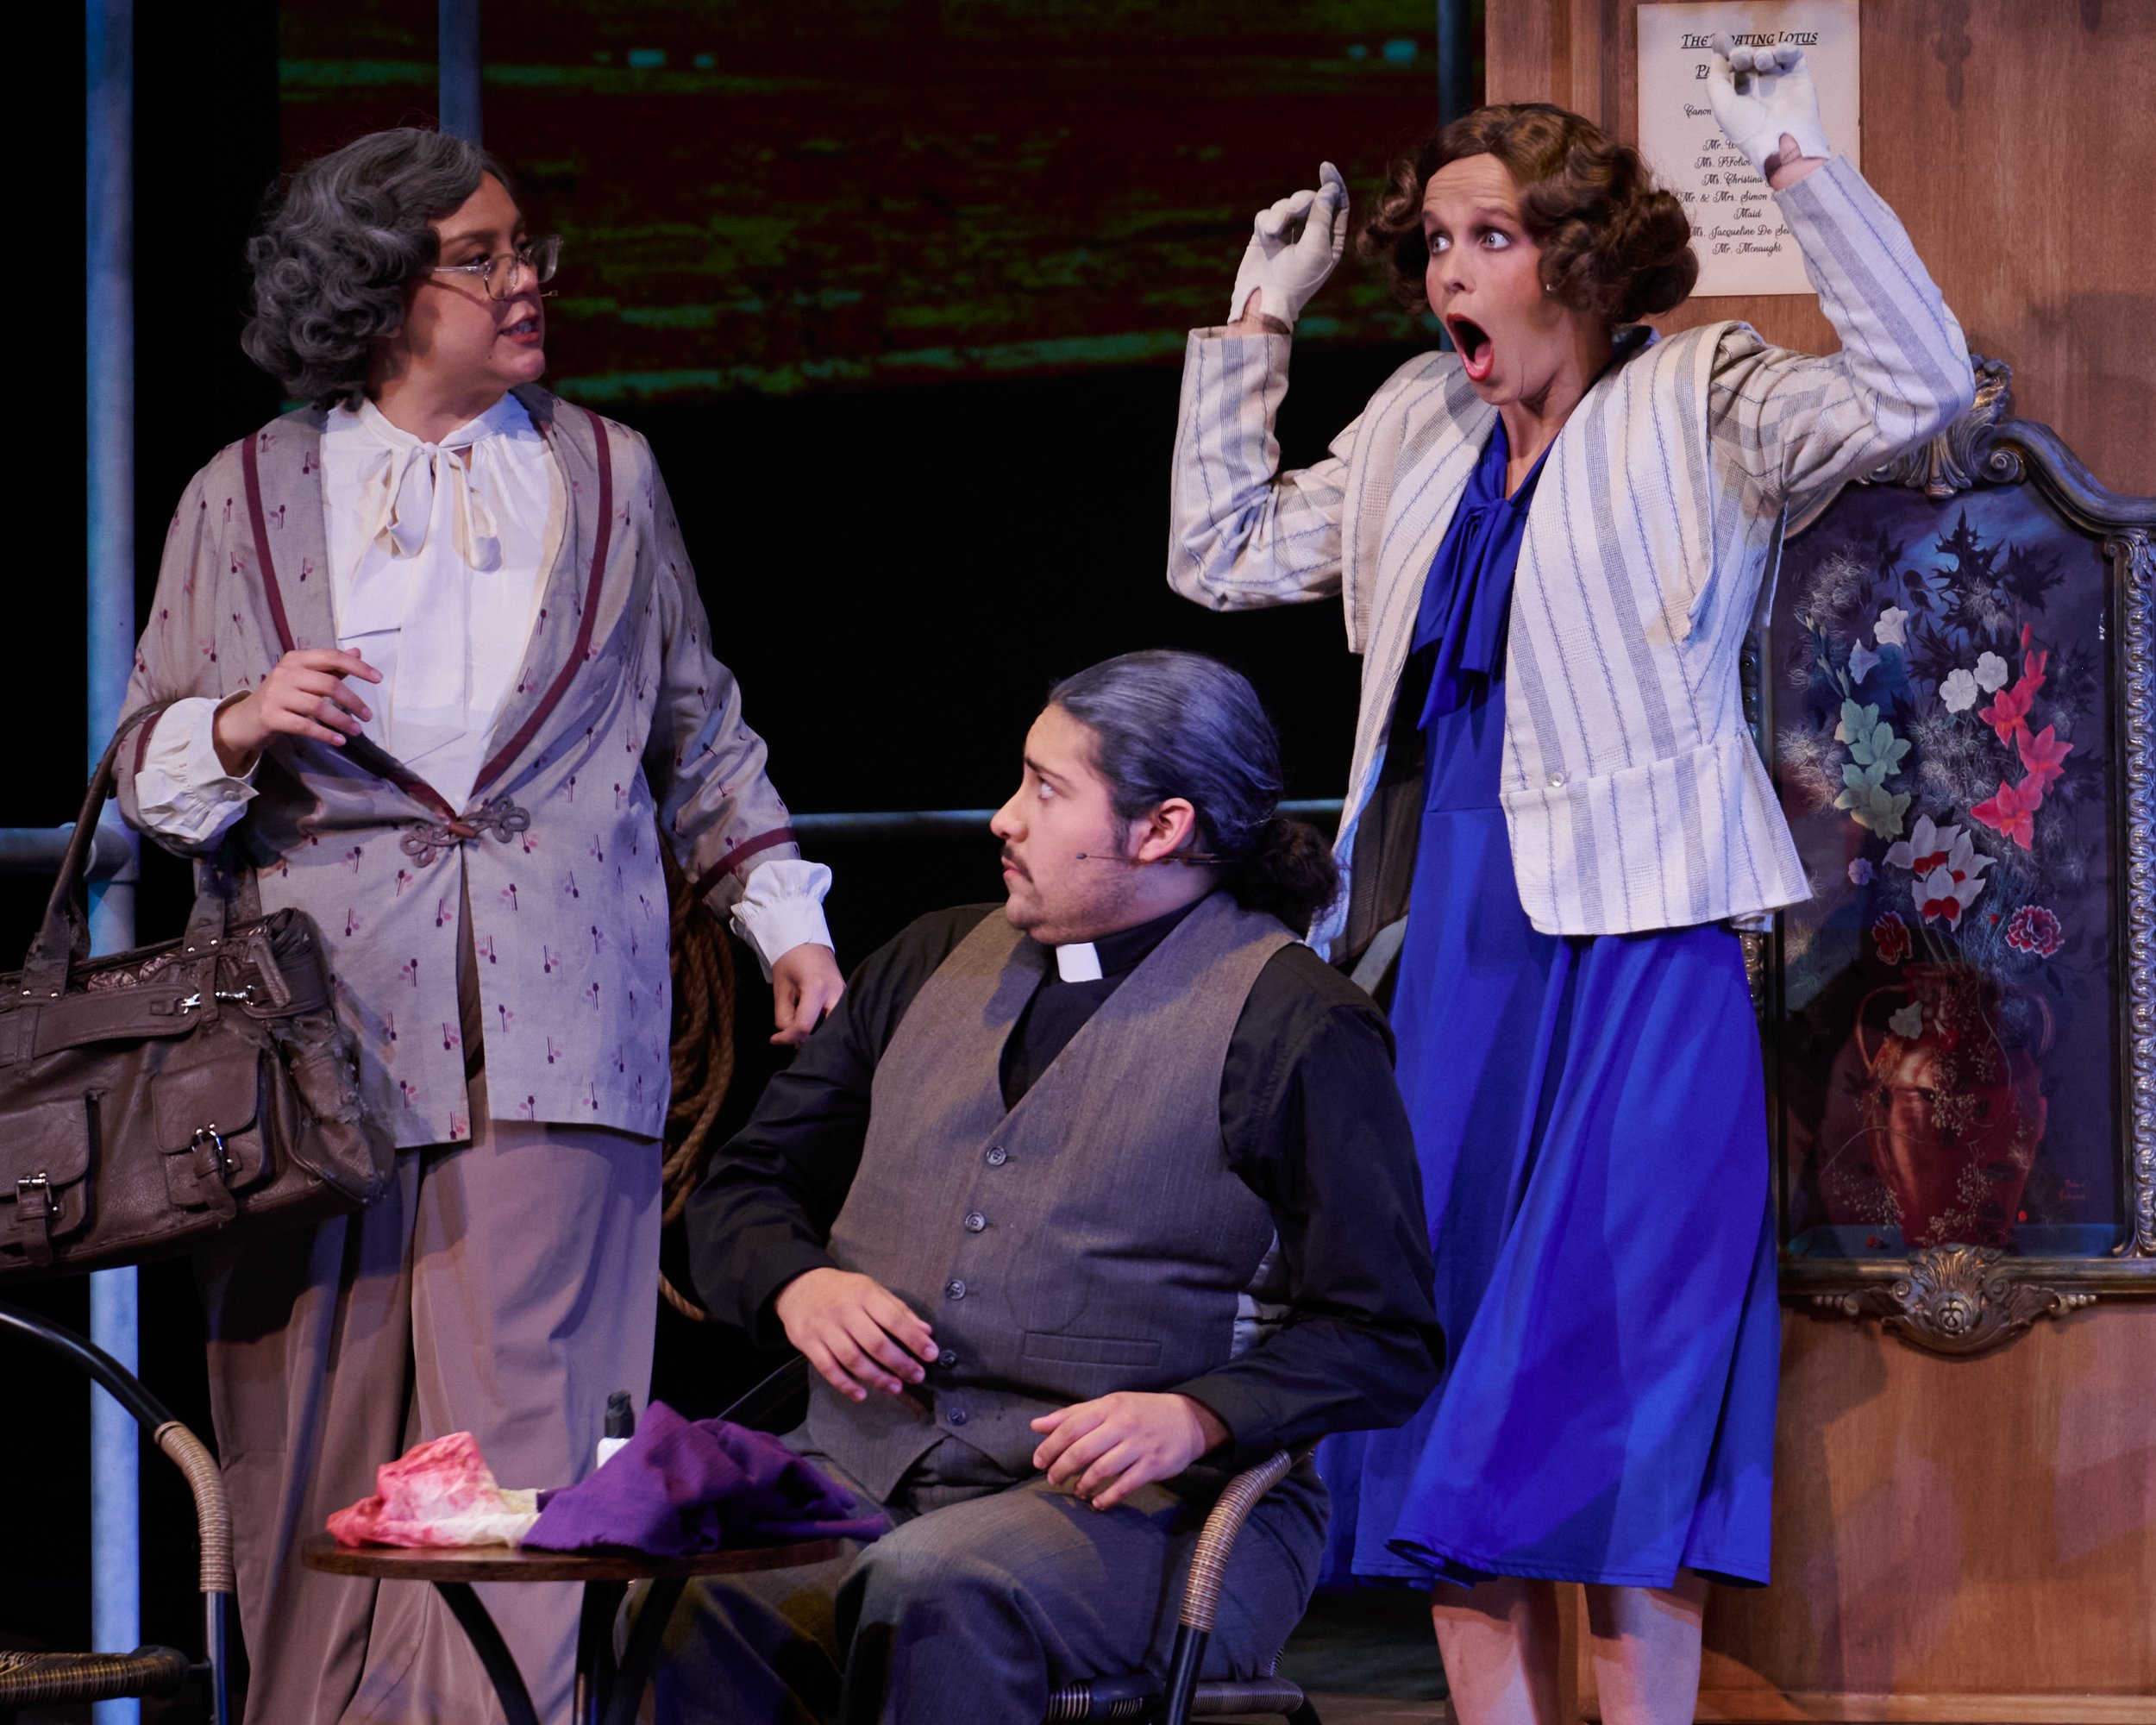  Nathalia Jimenez, AJ Sohrabi (seated), and Megan Winberg during dress rehearsal of the Santa Monica College Theatre Arts Department production of Agatha Christie's "Murder on the Nile" at the SMC Main Stage on Thursday, May 26, 2023, in Santa Monica